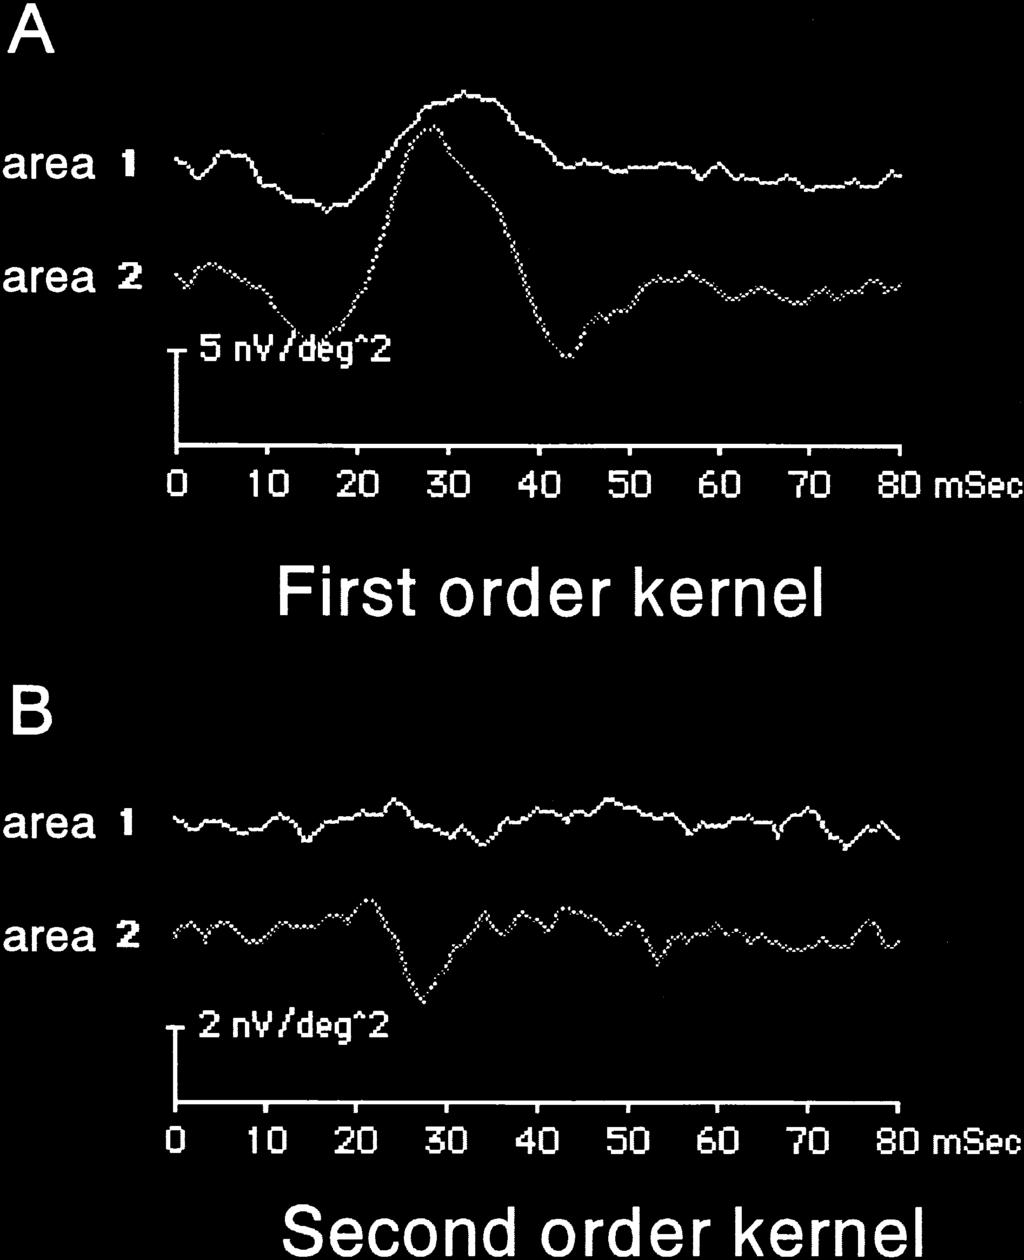 518 Jpn J Ophthalmol Vol 45: 516 522, 2001 Figure 2. (A) Averages of local first order responses of multifocal electroretinogram (M-ERG) in case 1.